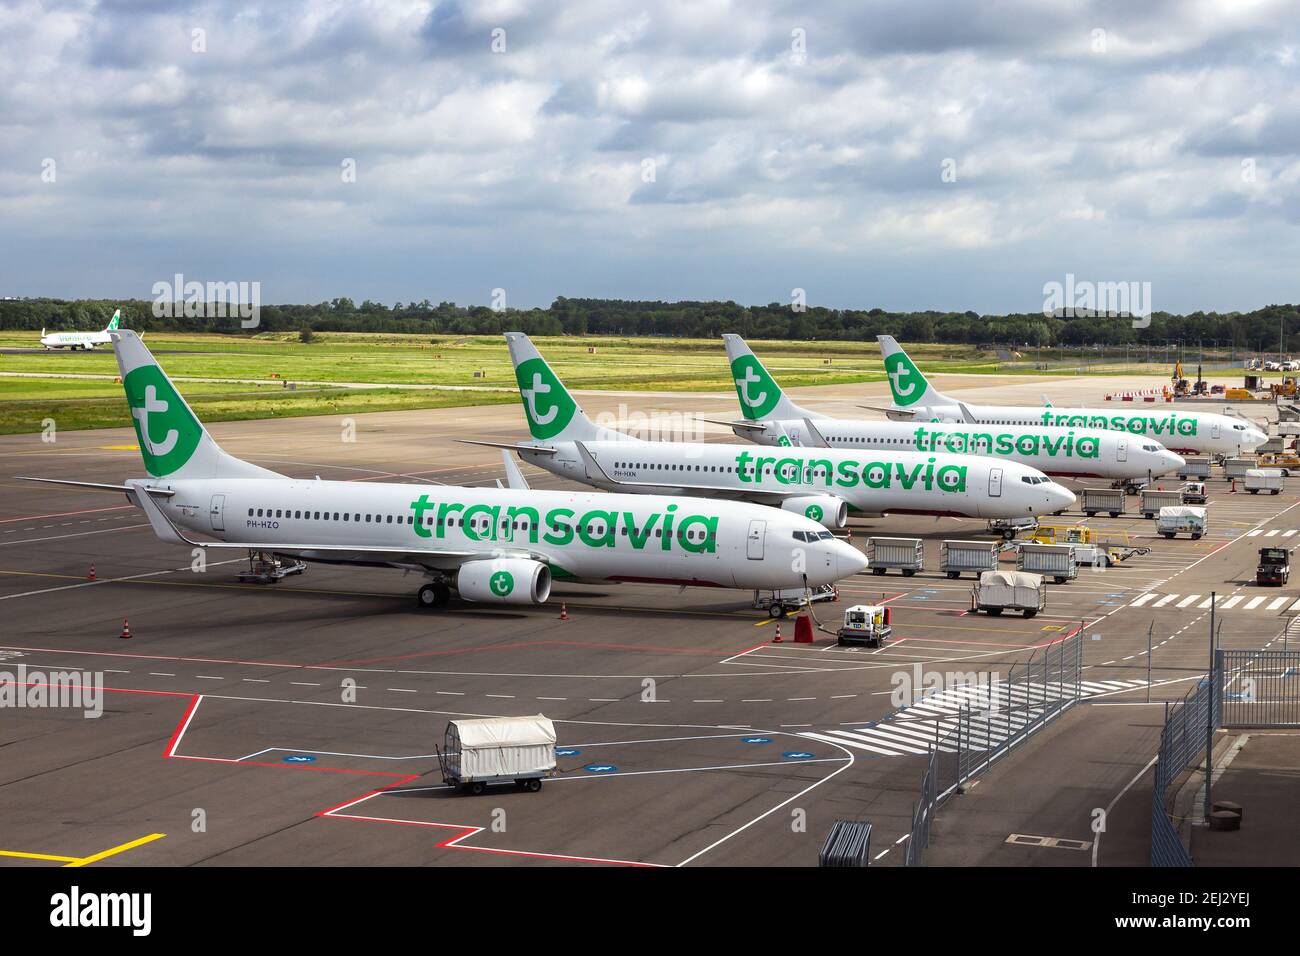 Transavia low-cost airline passenger planes on the tarmac of Eindhoven Airport. The Netherlands - June 30, 2020 Stock Photo